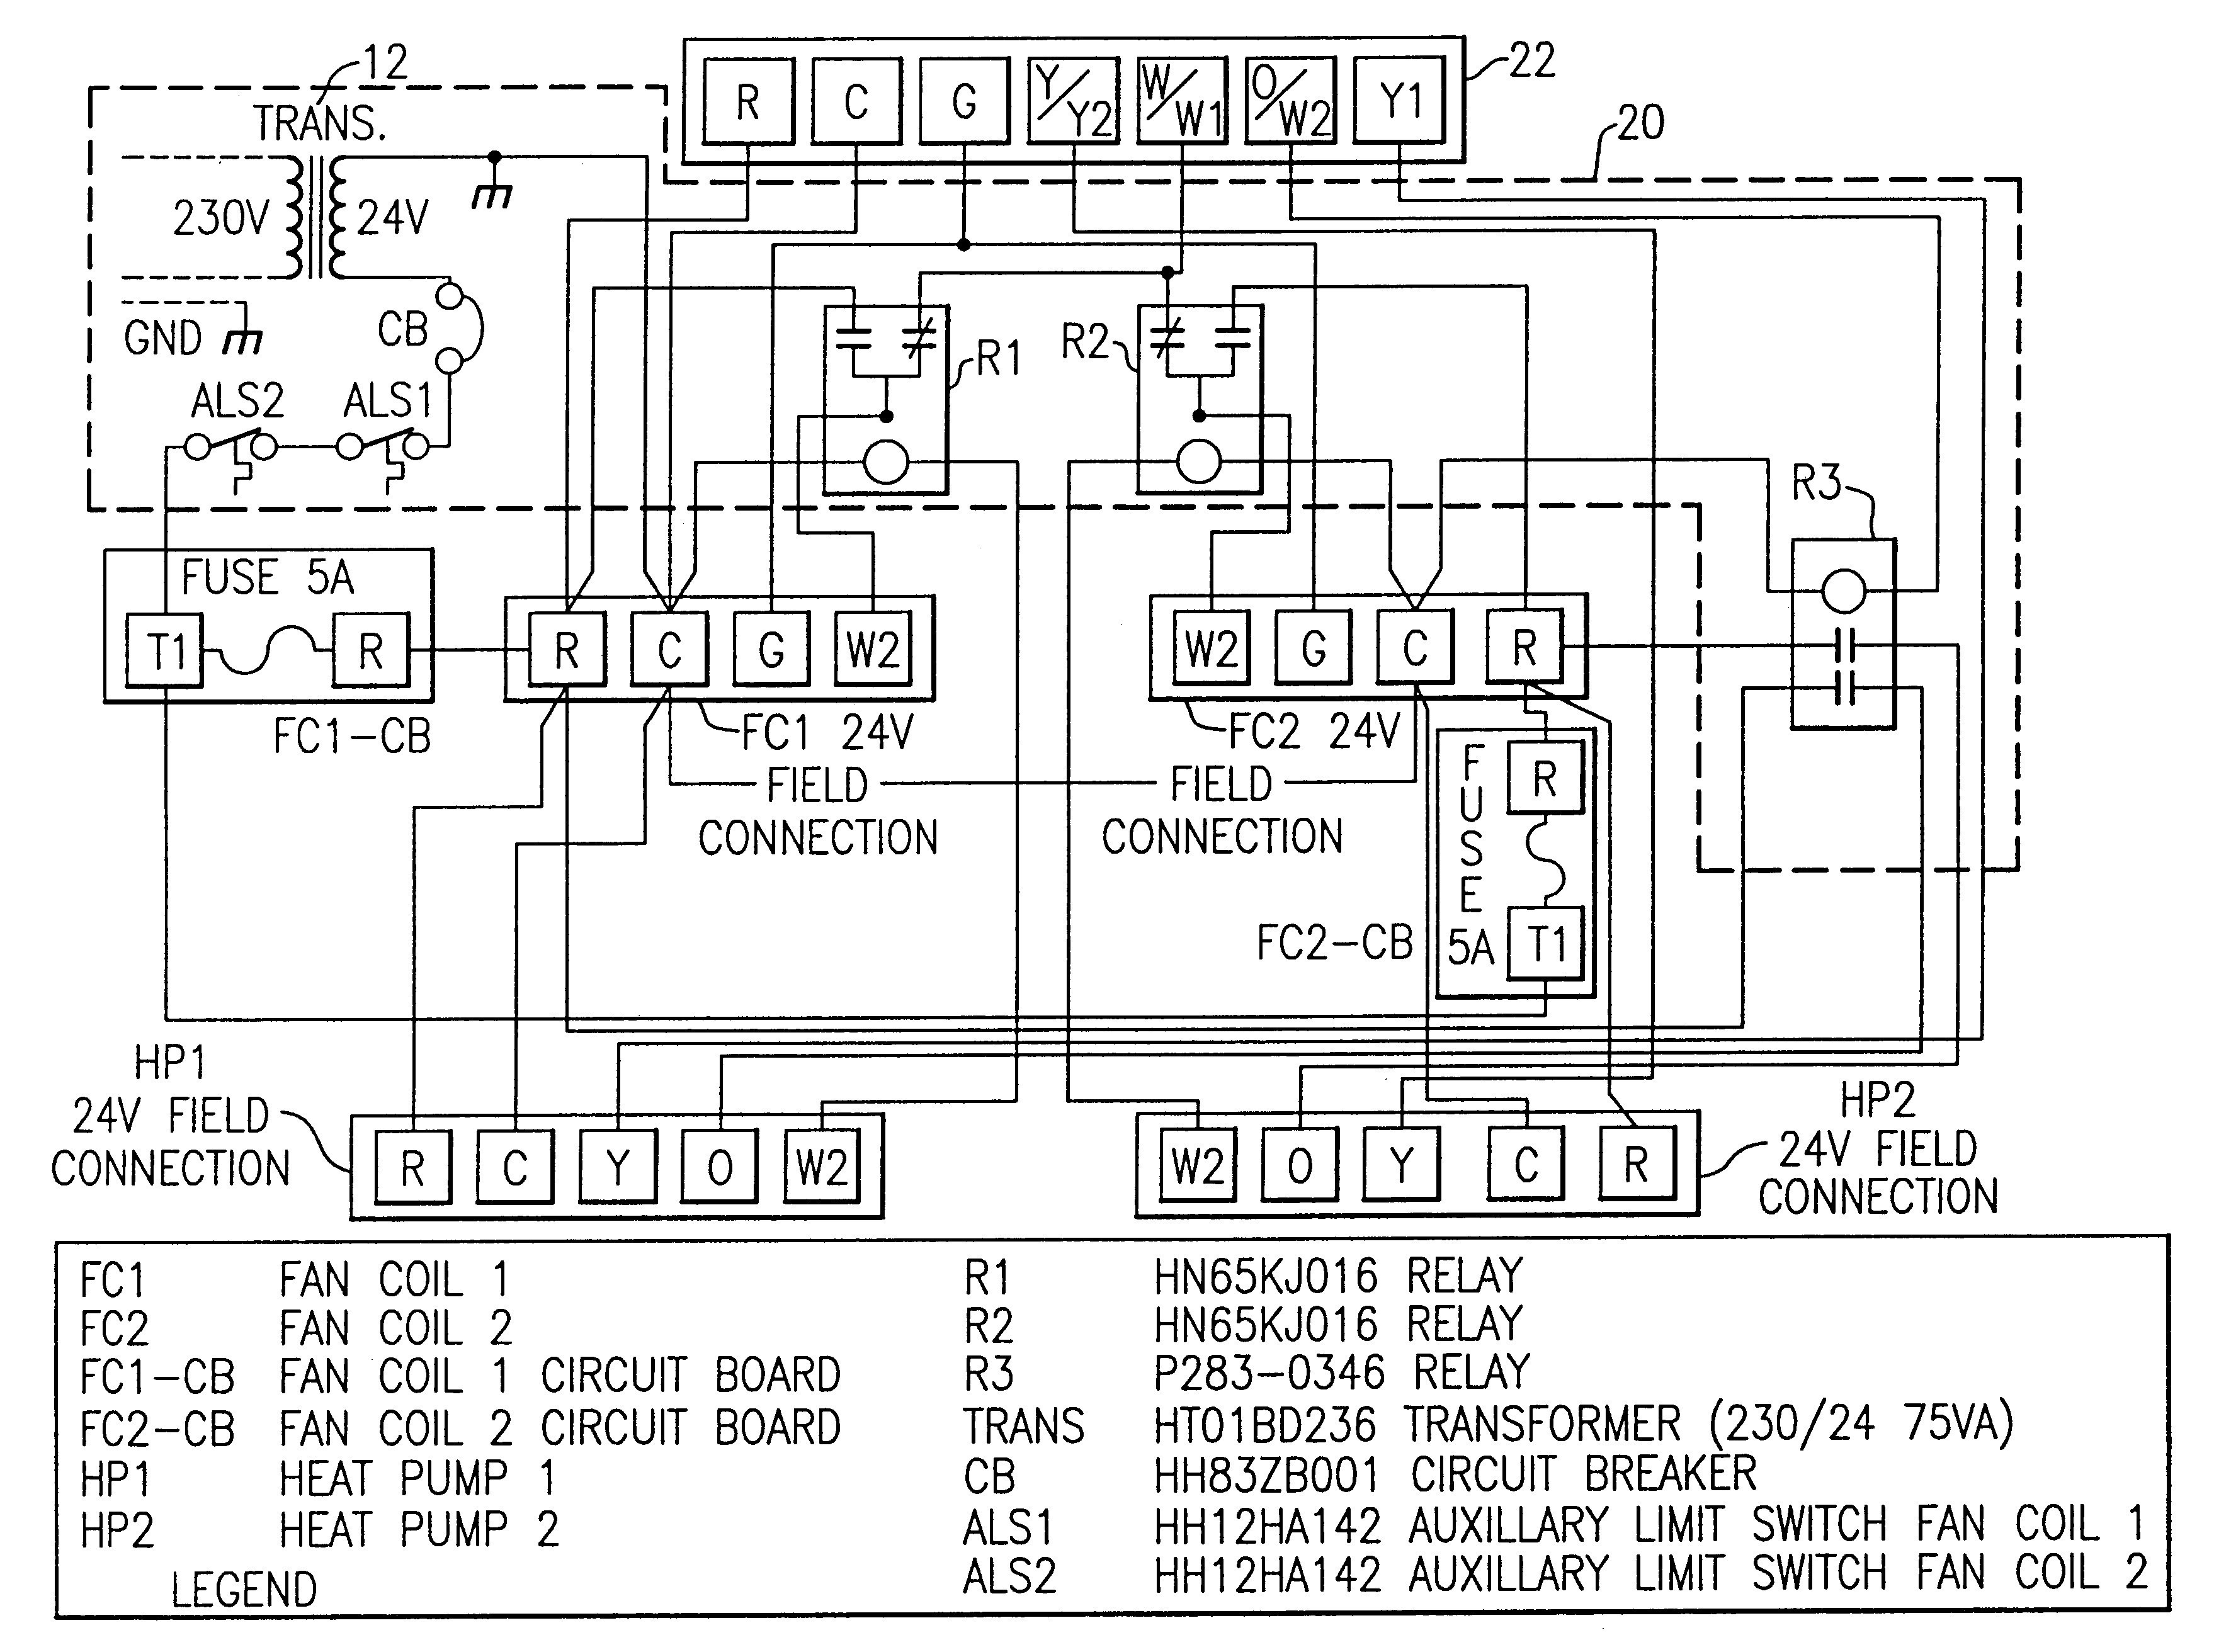 Wiring Diagram for York Air Conditioner Save Wiring Diagram Ac York Inspirationa Wiring Diagram Fan Motor